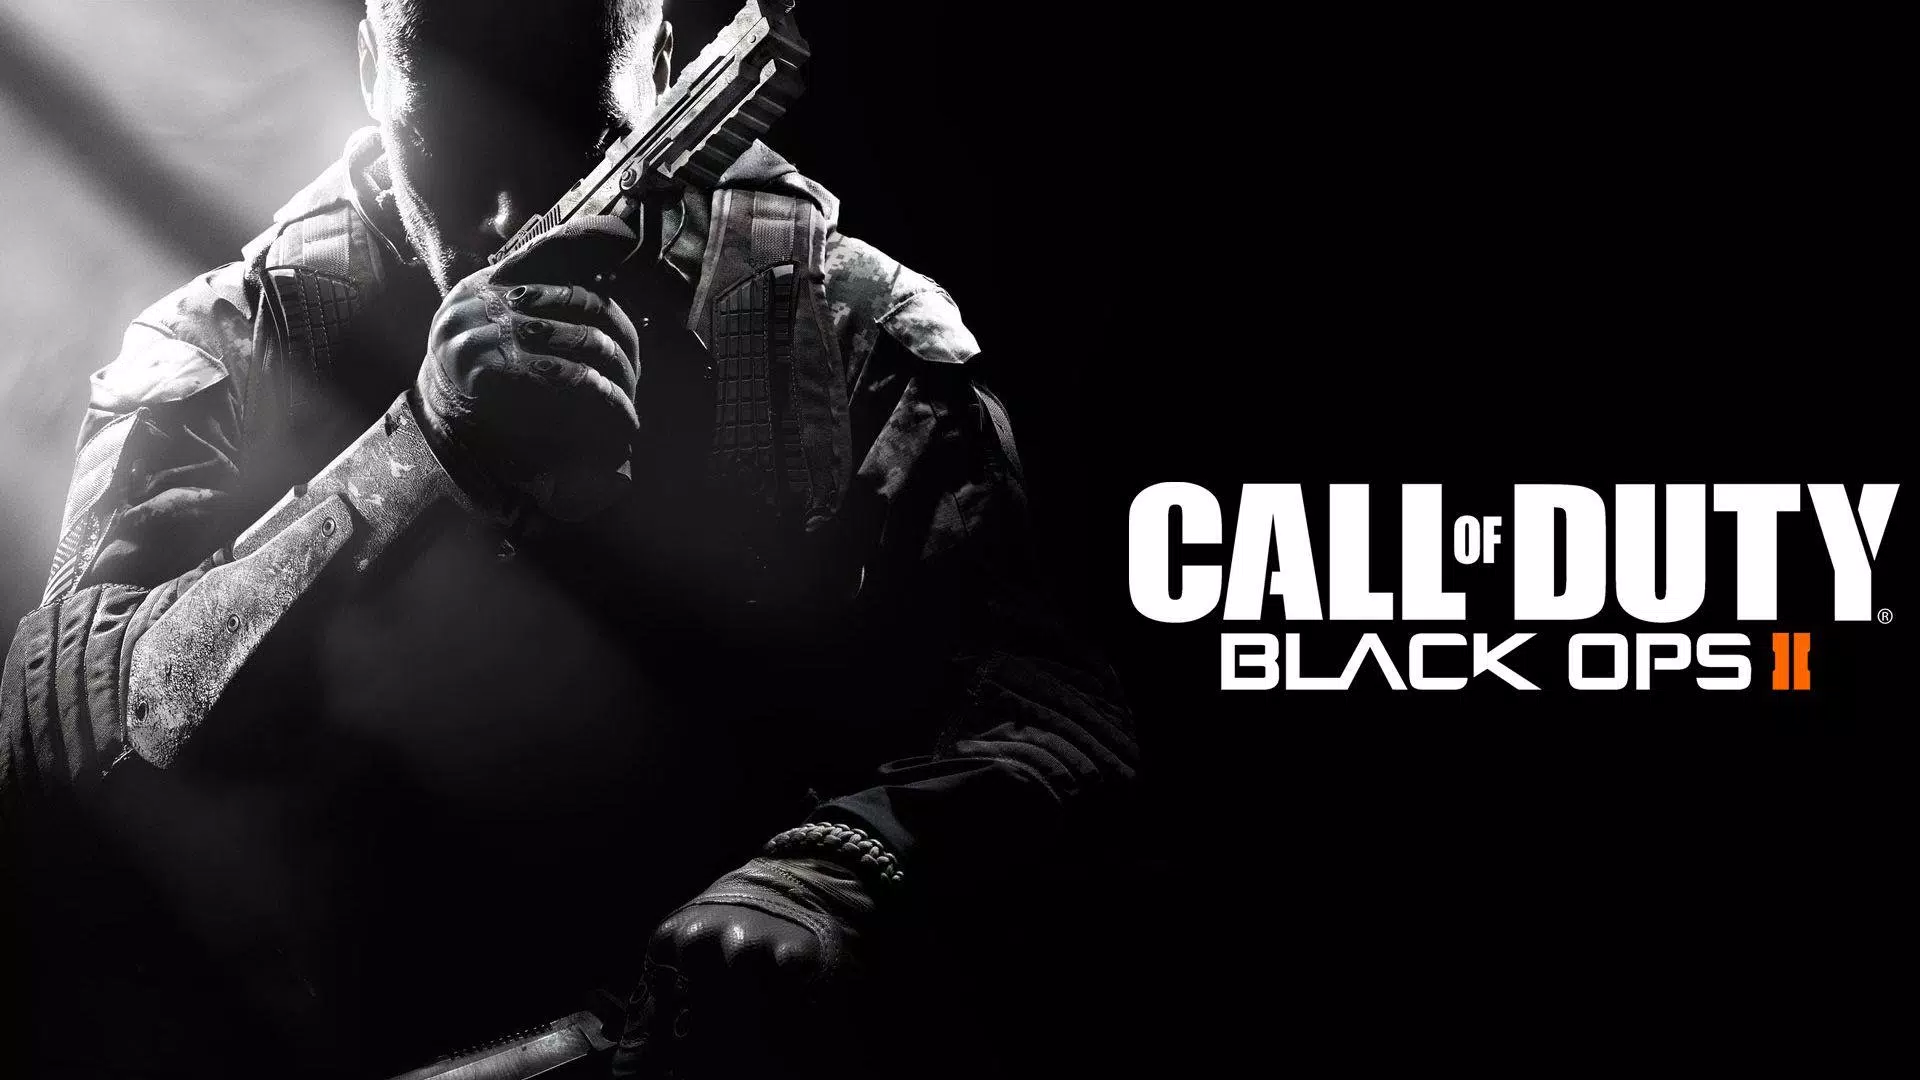 Call of Duty® - APK Download for Android